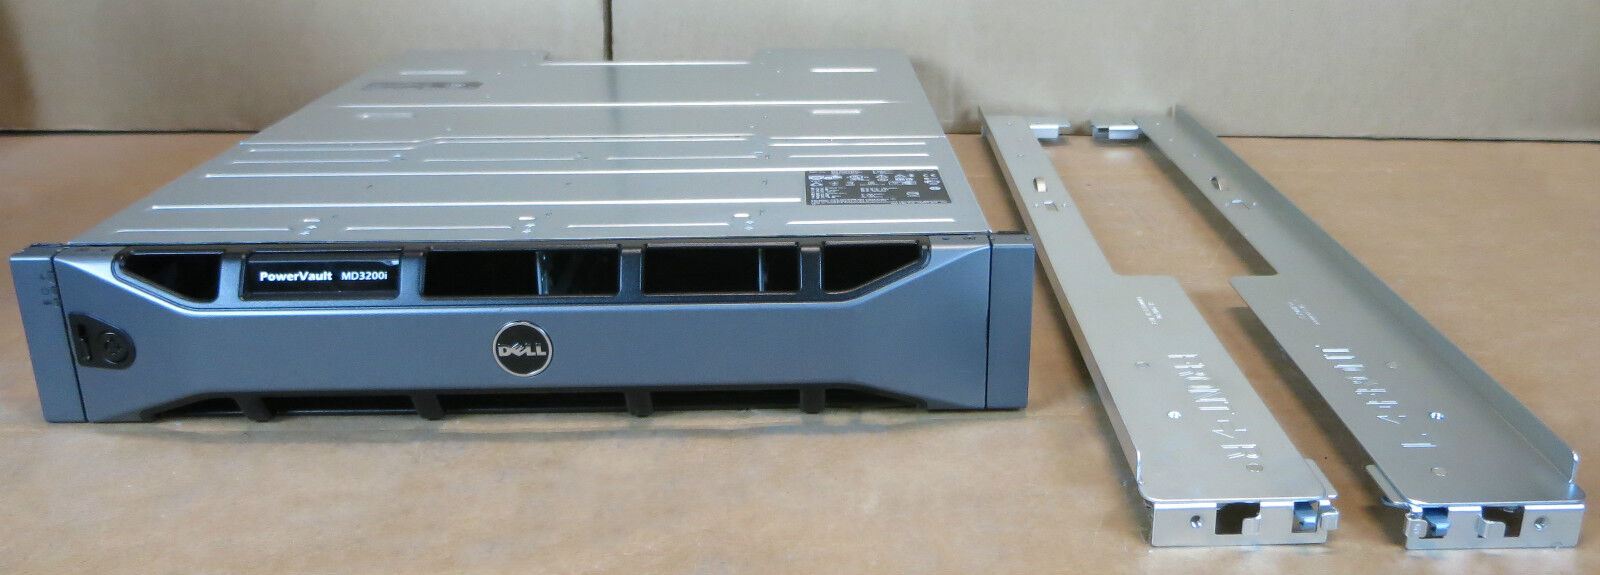 Dell PowerVault MD3200i iSCSI SAN Storage Array Dual Controller